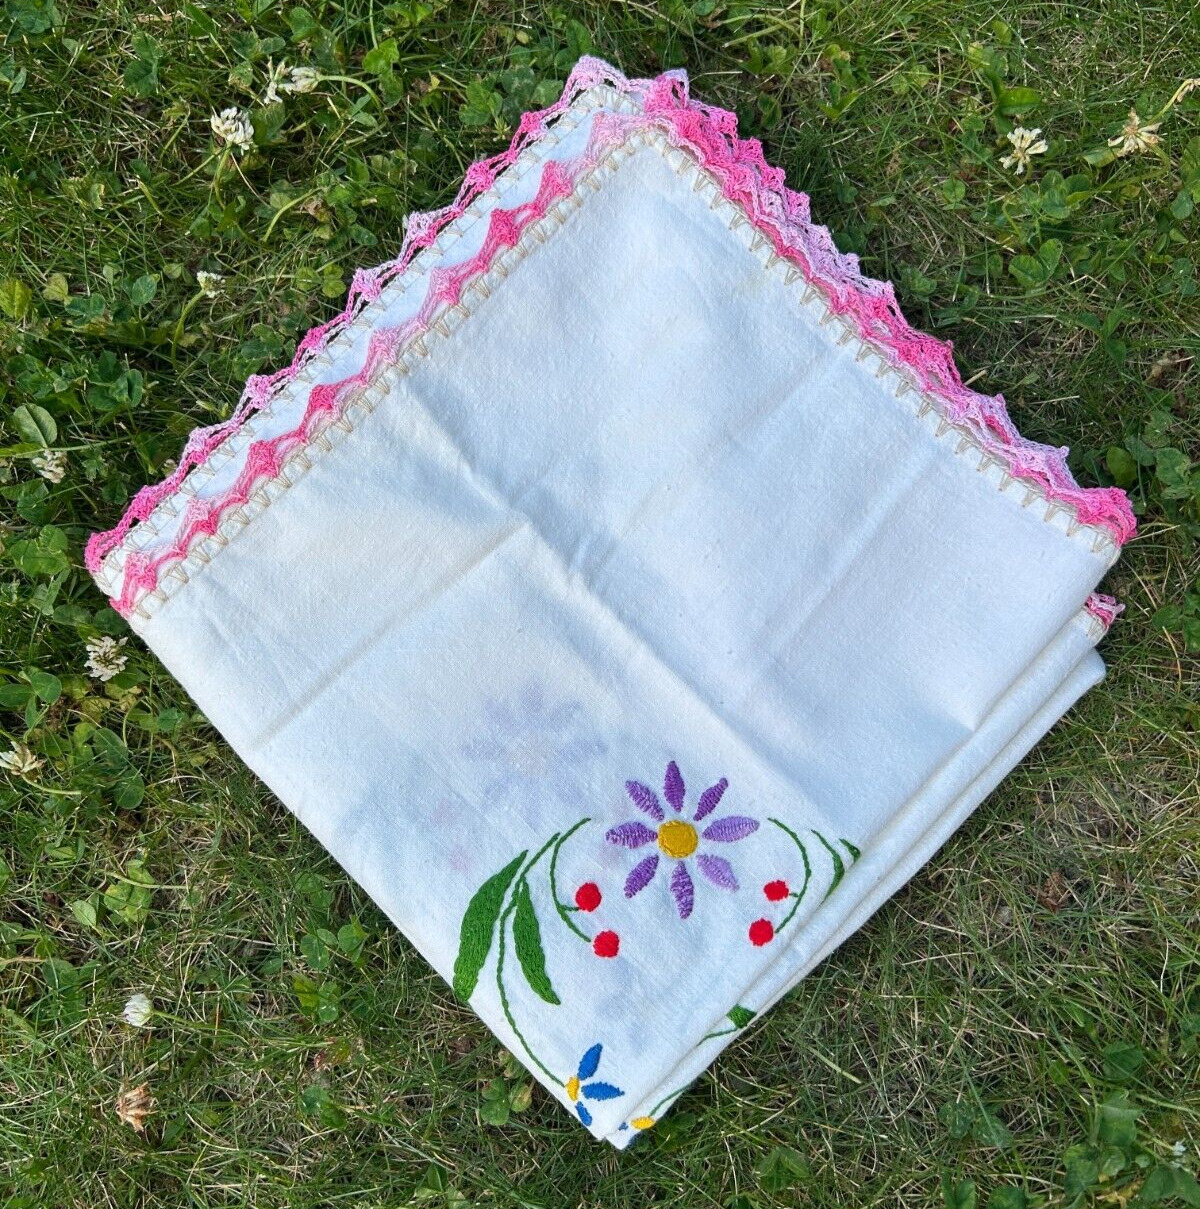 Vintage Cotton Crochet Edged Embroidered Square Tablecloth Handmade Floral Pink